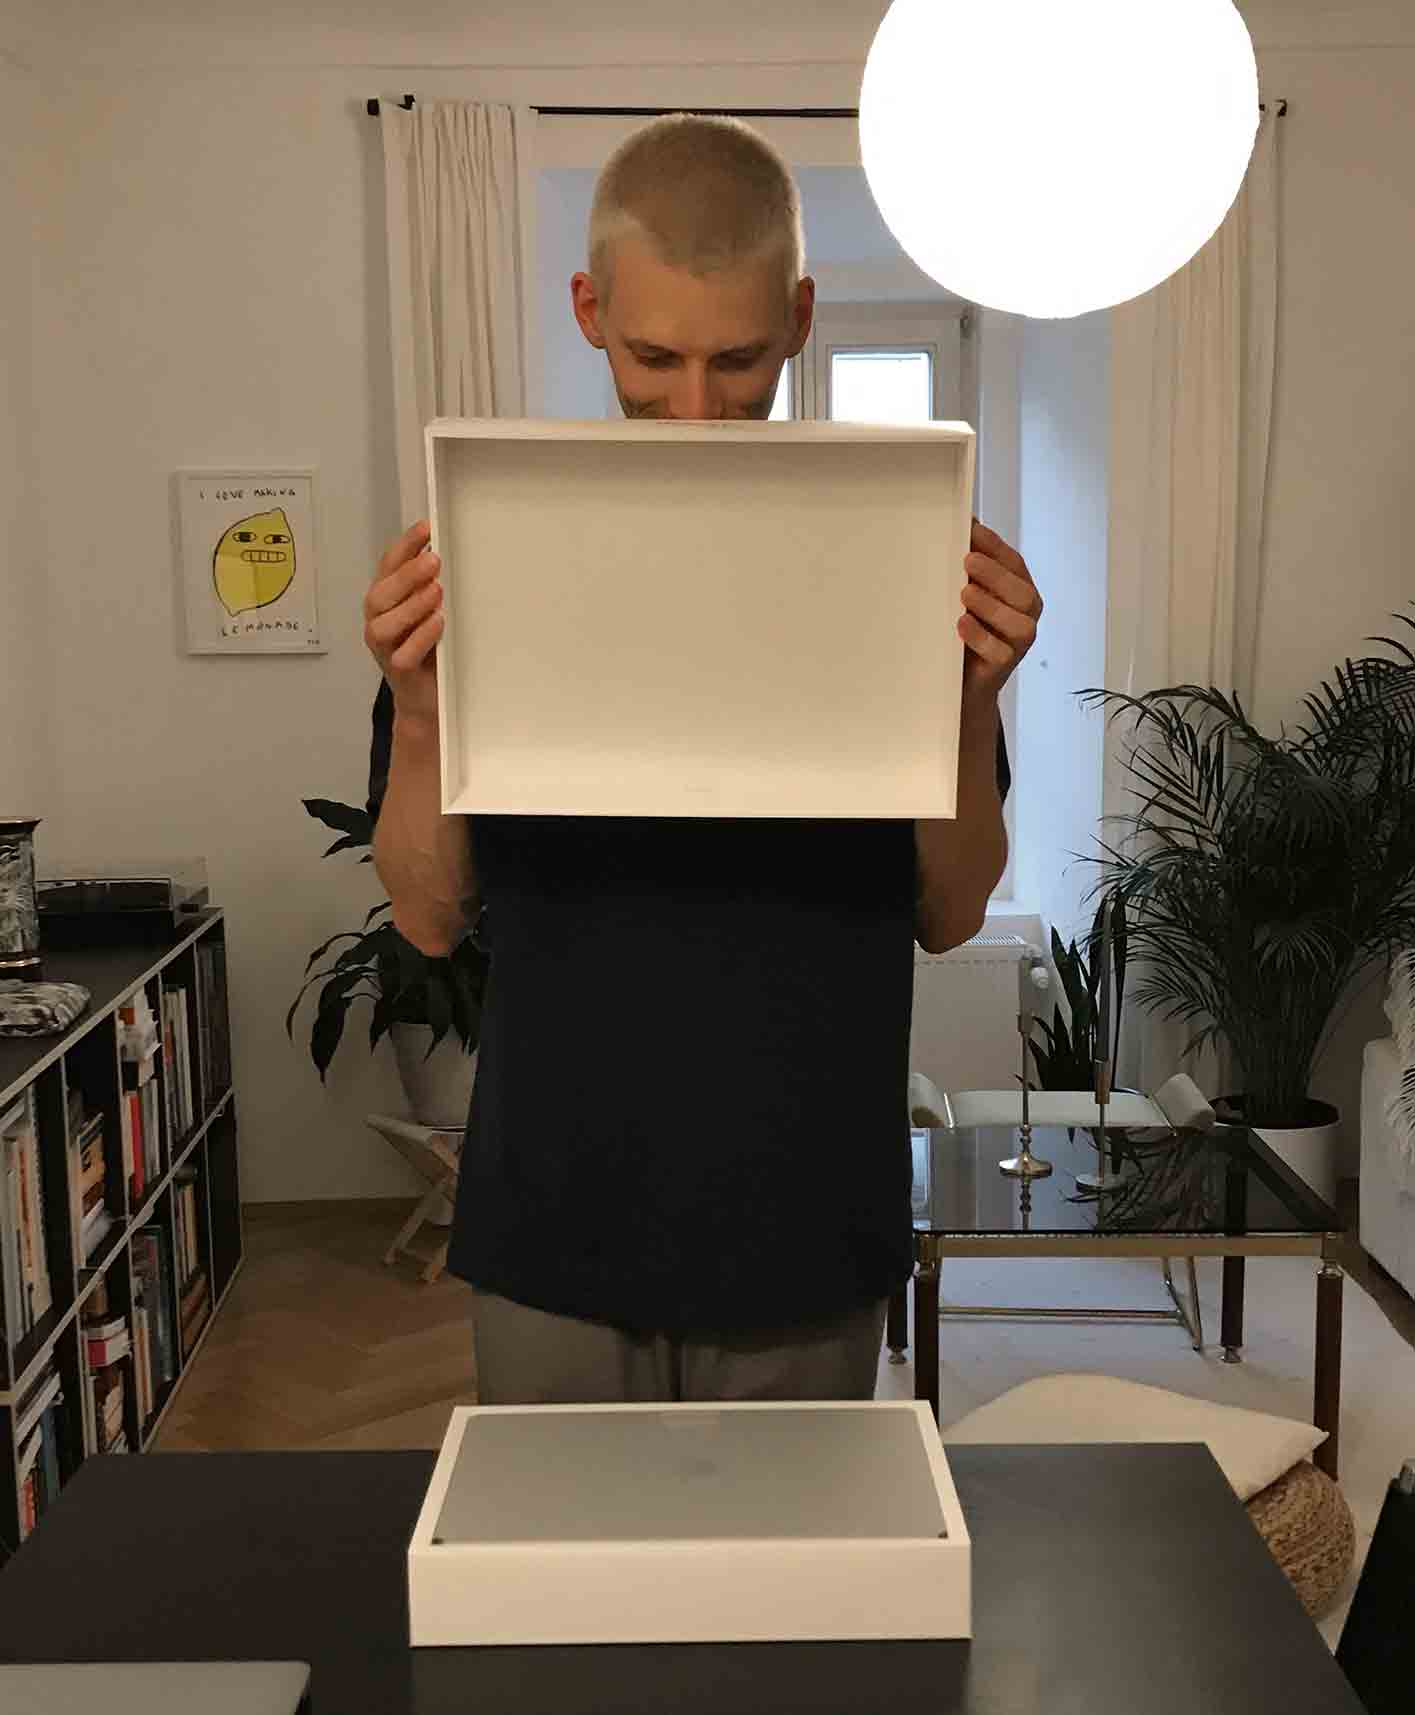 Christian Leban opening the box of his new laptop looking very exciting standing next to the table.